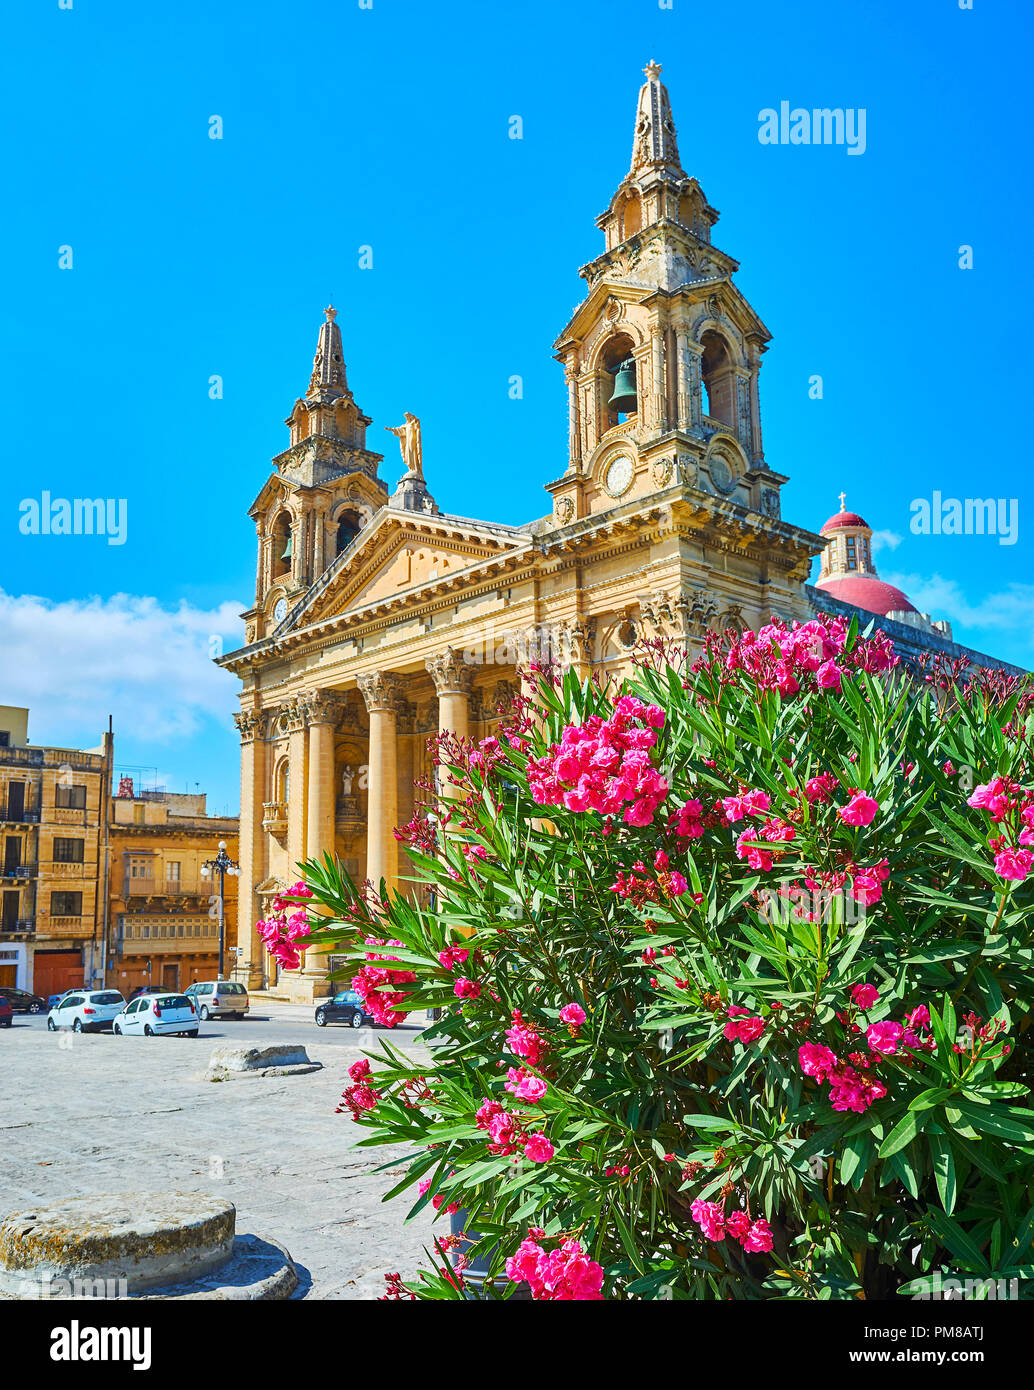 The Neoclassical facade of St Publius Parish Church with blooming rhododendron shrub on the foreground, Floriana, Malta. Stock Photo